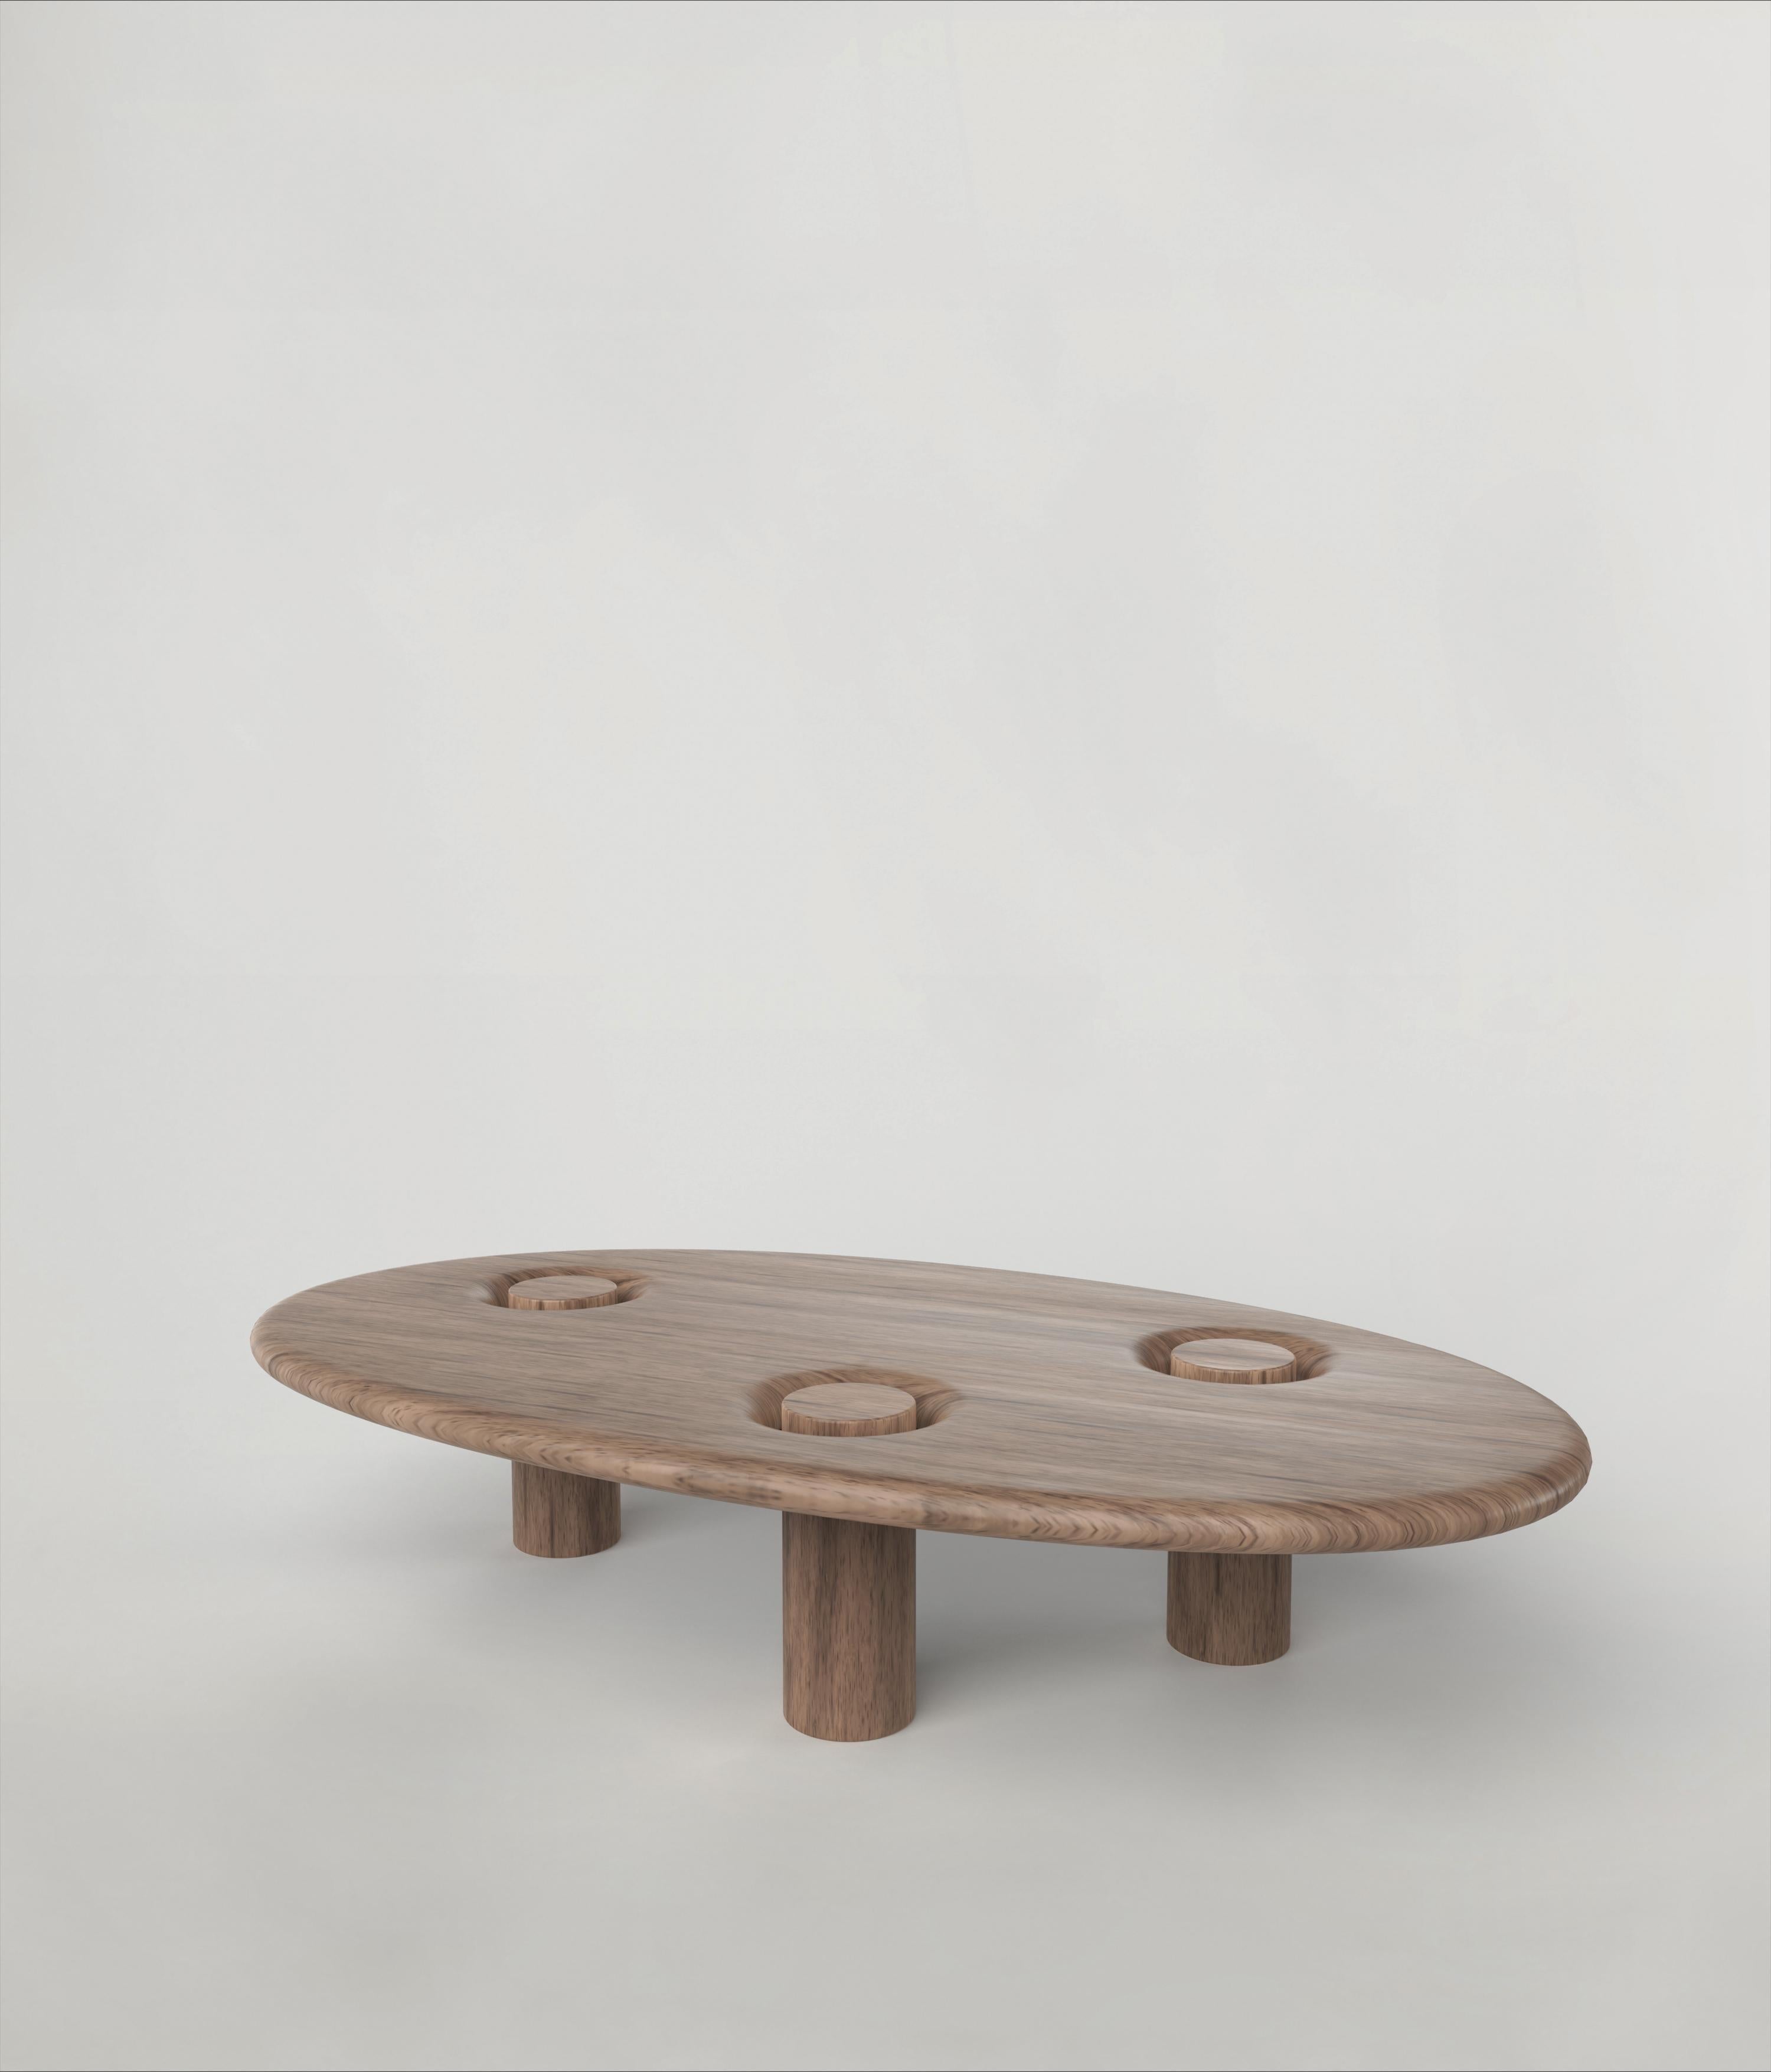 Asido V2 low table by Edizione Limitata
Limited Edition of 150. Signed and numbered.
Dimensions: D 137 x W 78 x H 29 cm.
Materials: solid ash wood

The collectible design language Asido has been developed by the Edizione Limitata’s art research team